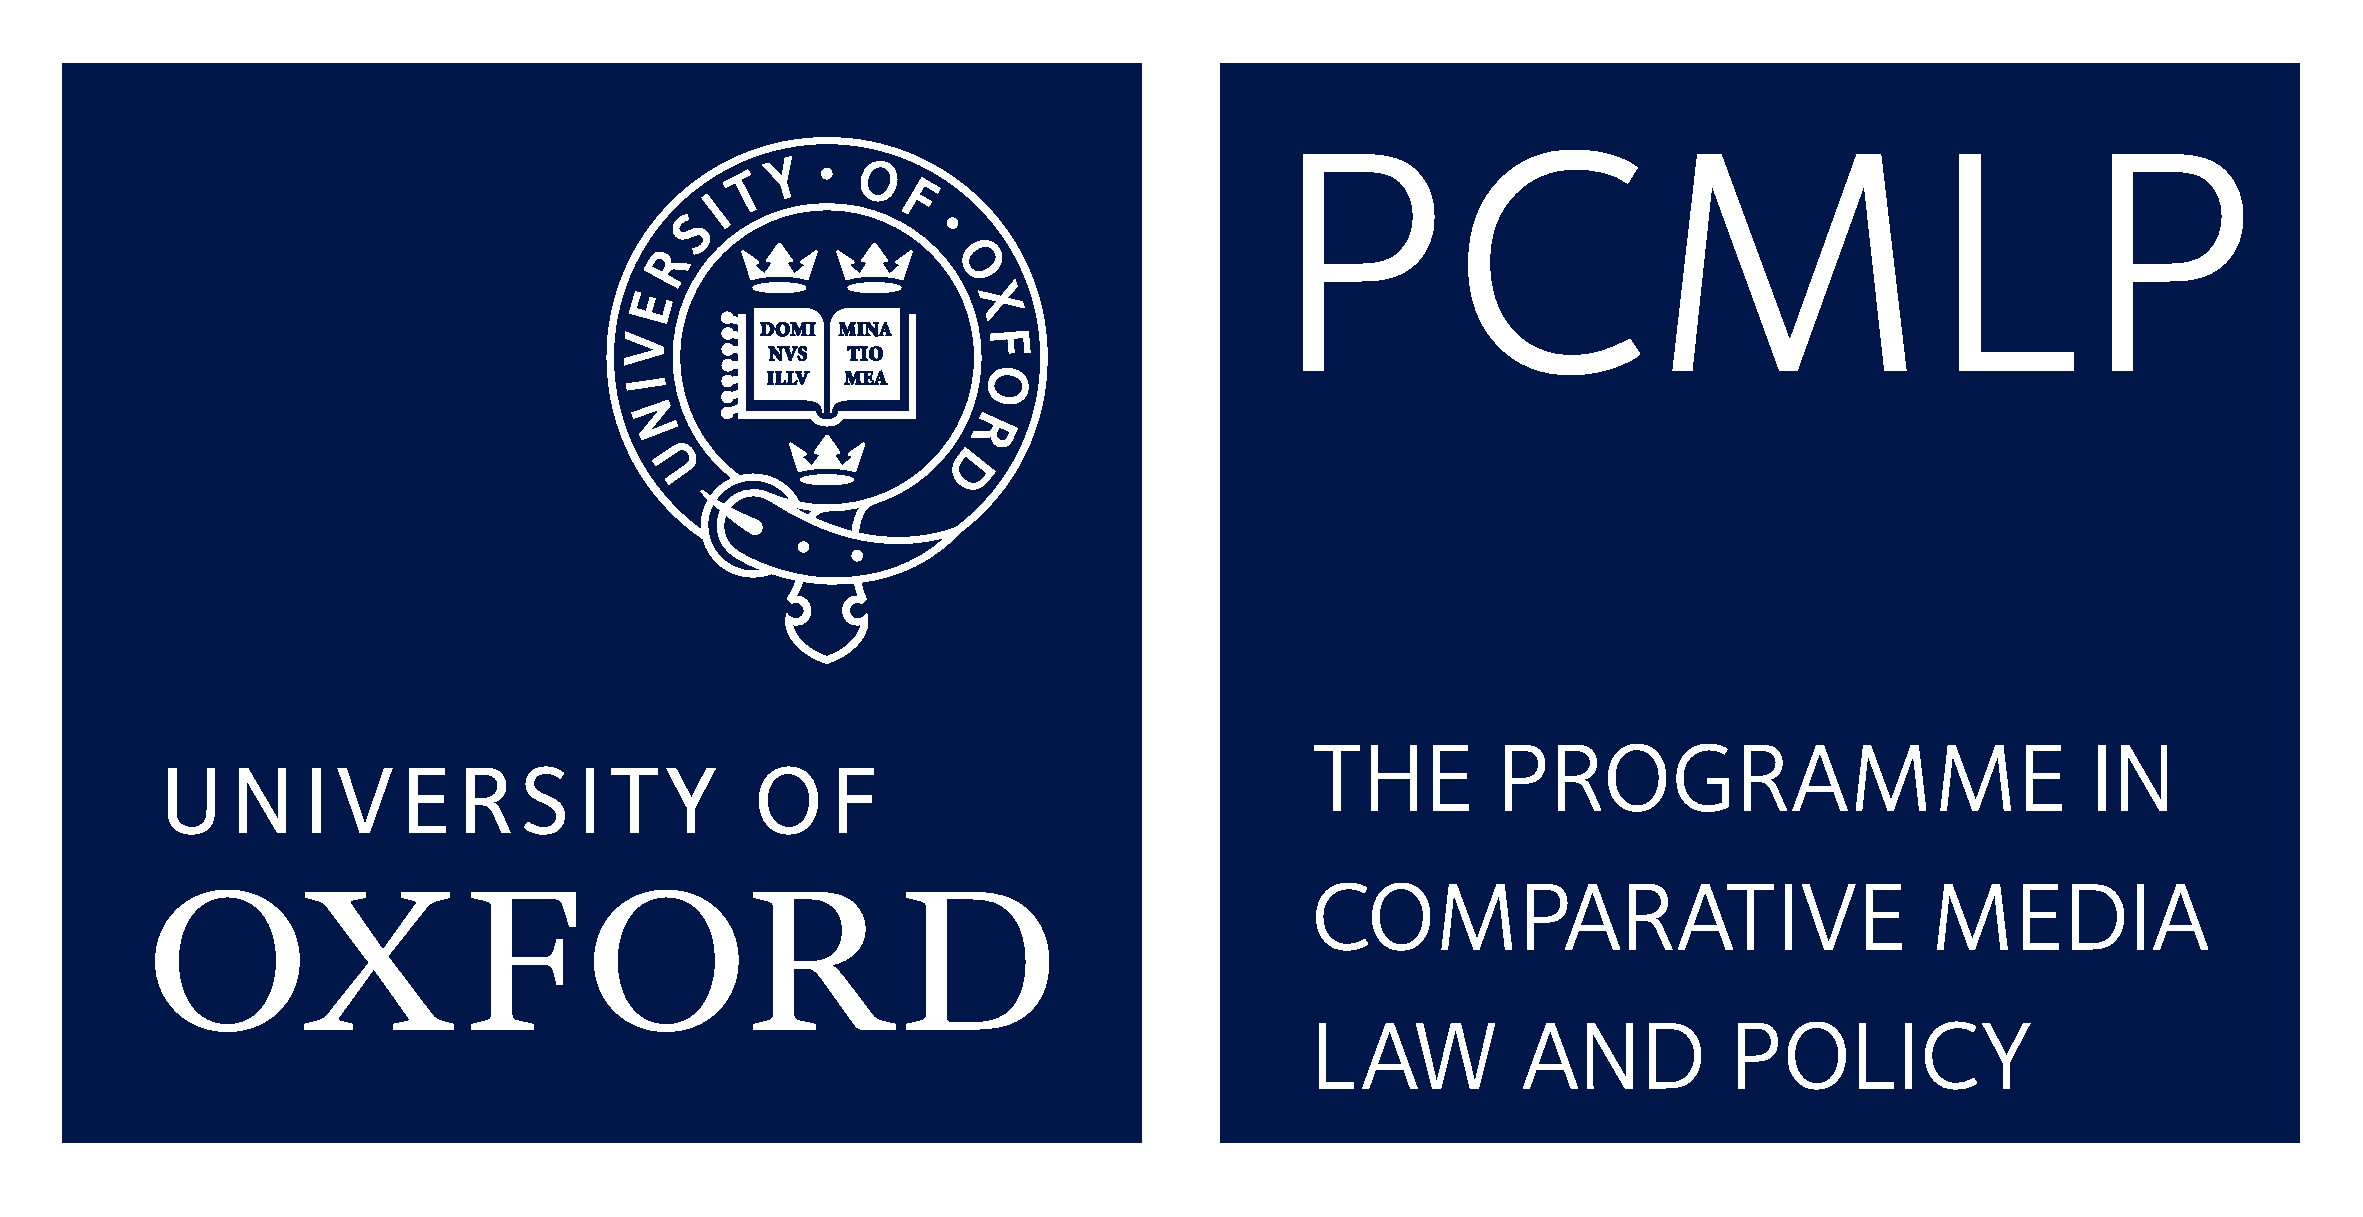 PCMLP logo - Oxford blue background with words 'PCMLP - The programme in comparative media law and policy' on it, next to Uni of Oxford logo